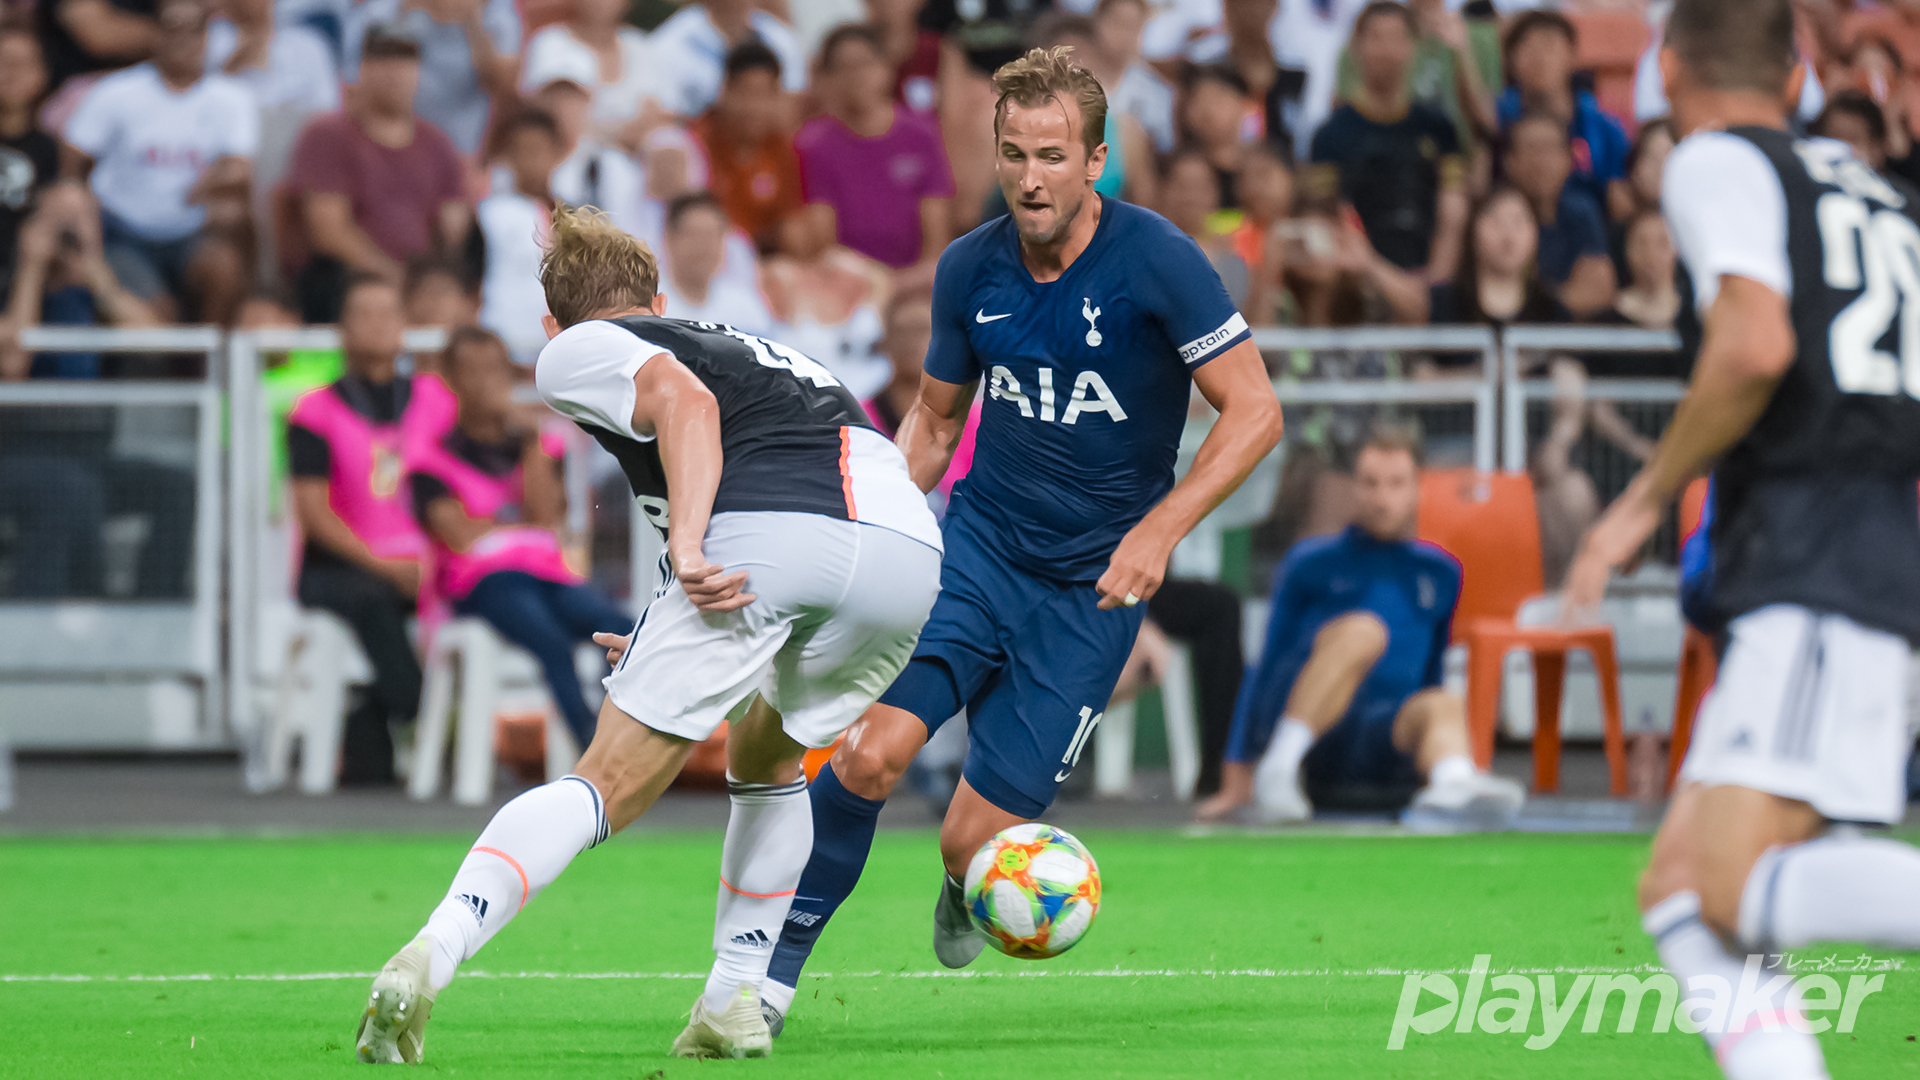 TOTTENHAM HOTSPUR RETURNS TO SINGAPORE FOR FRIENDLY MATCH WITH AS ROMA